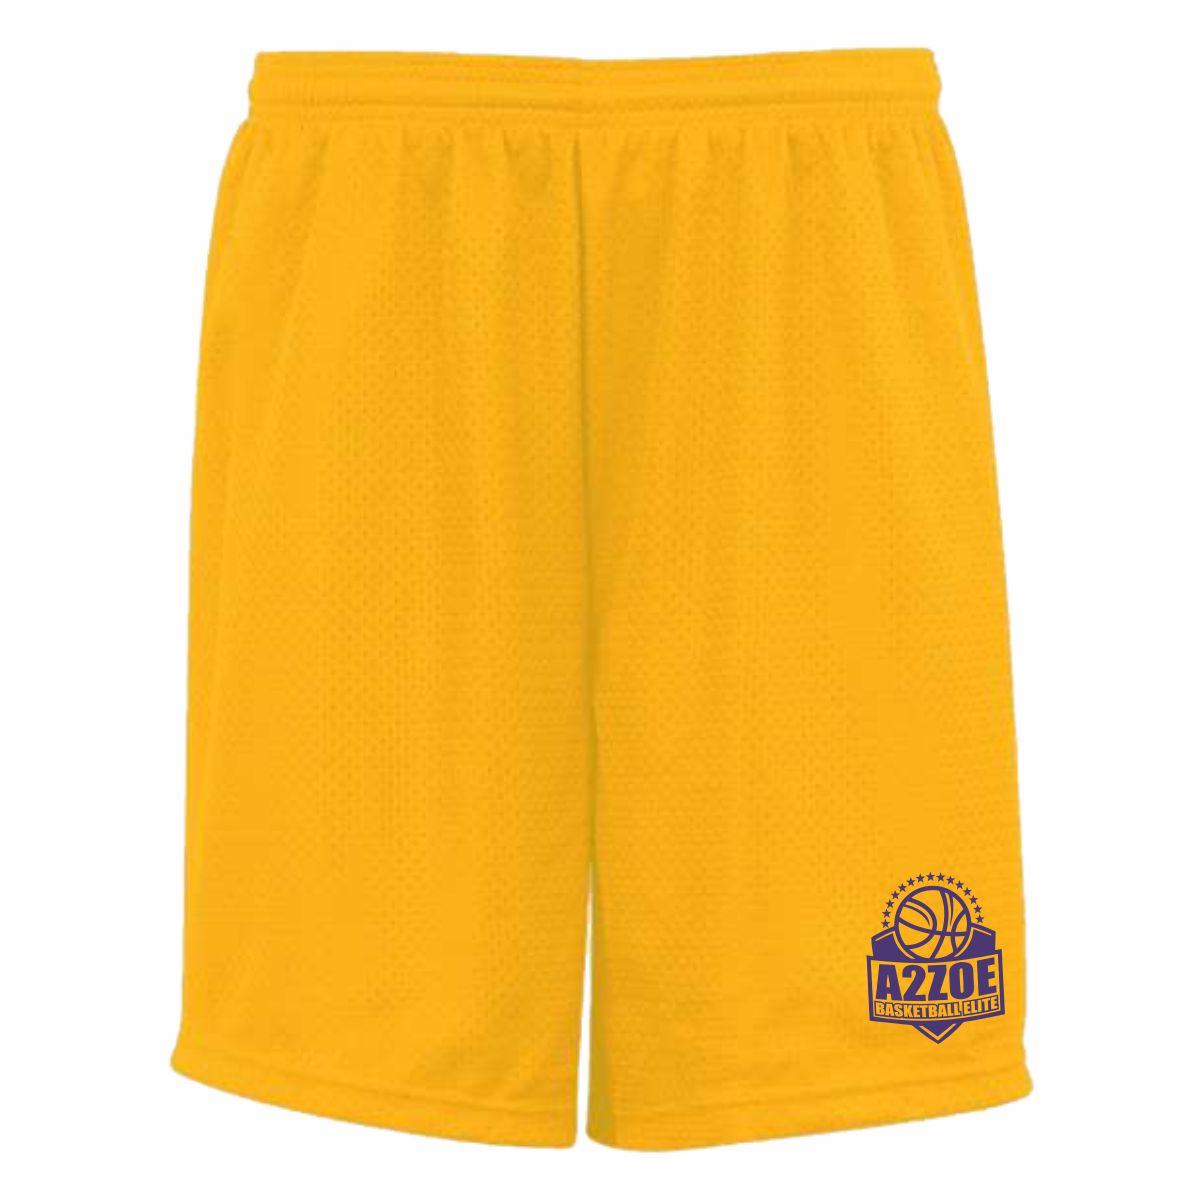 A2ZOE Elite Basketball Adult & Youth Mesh Shorts | HyperStitch, Inc